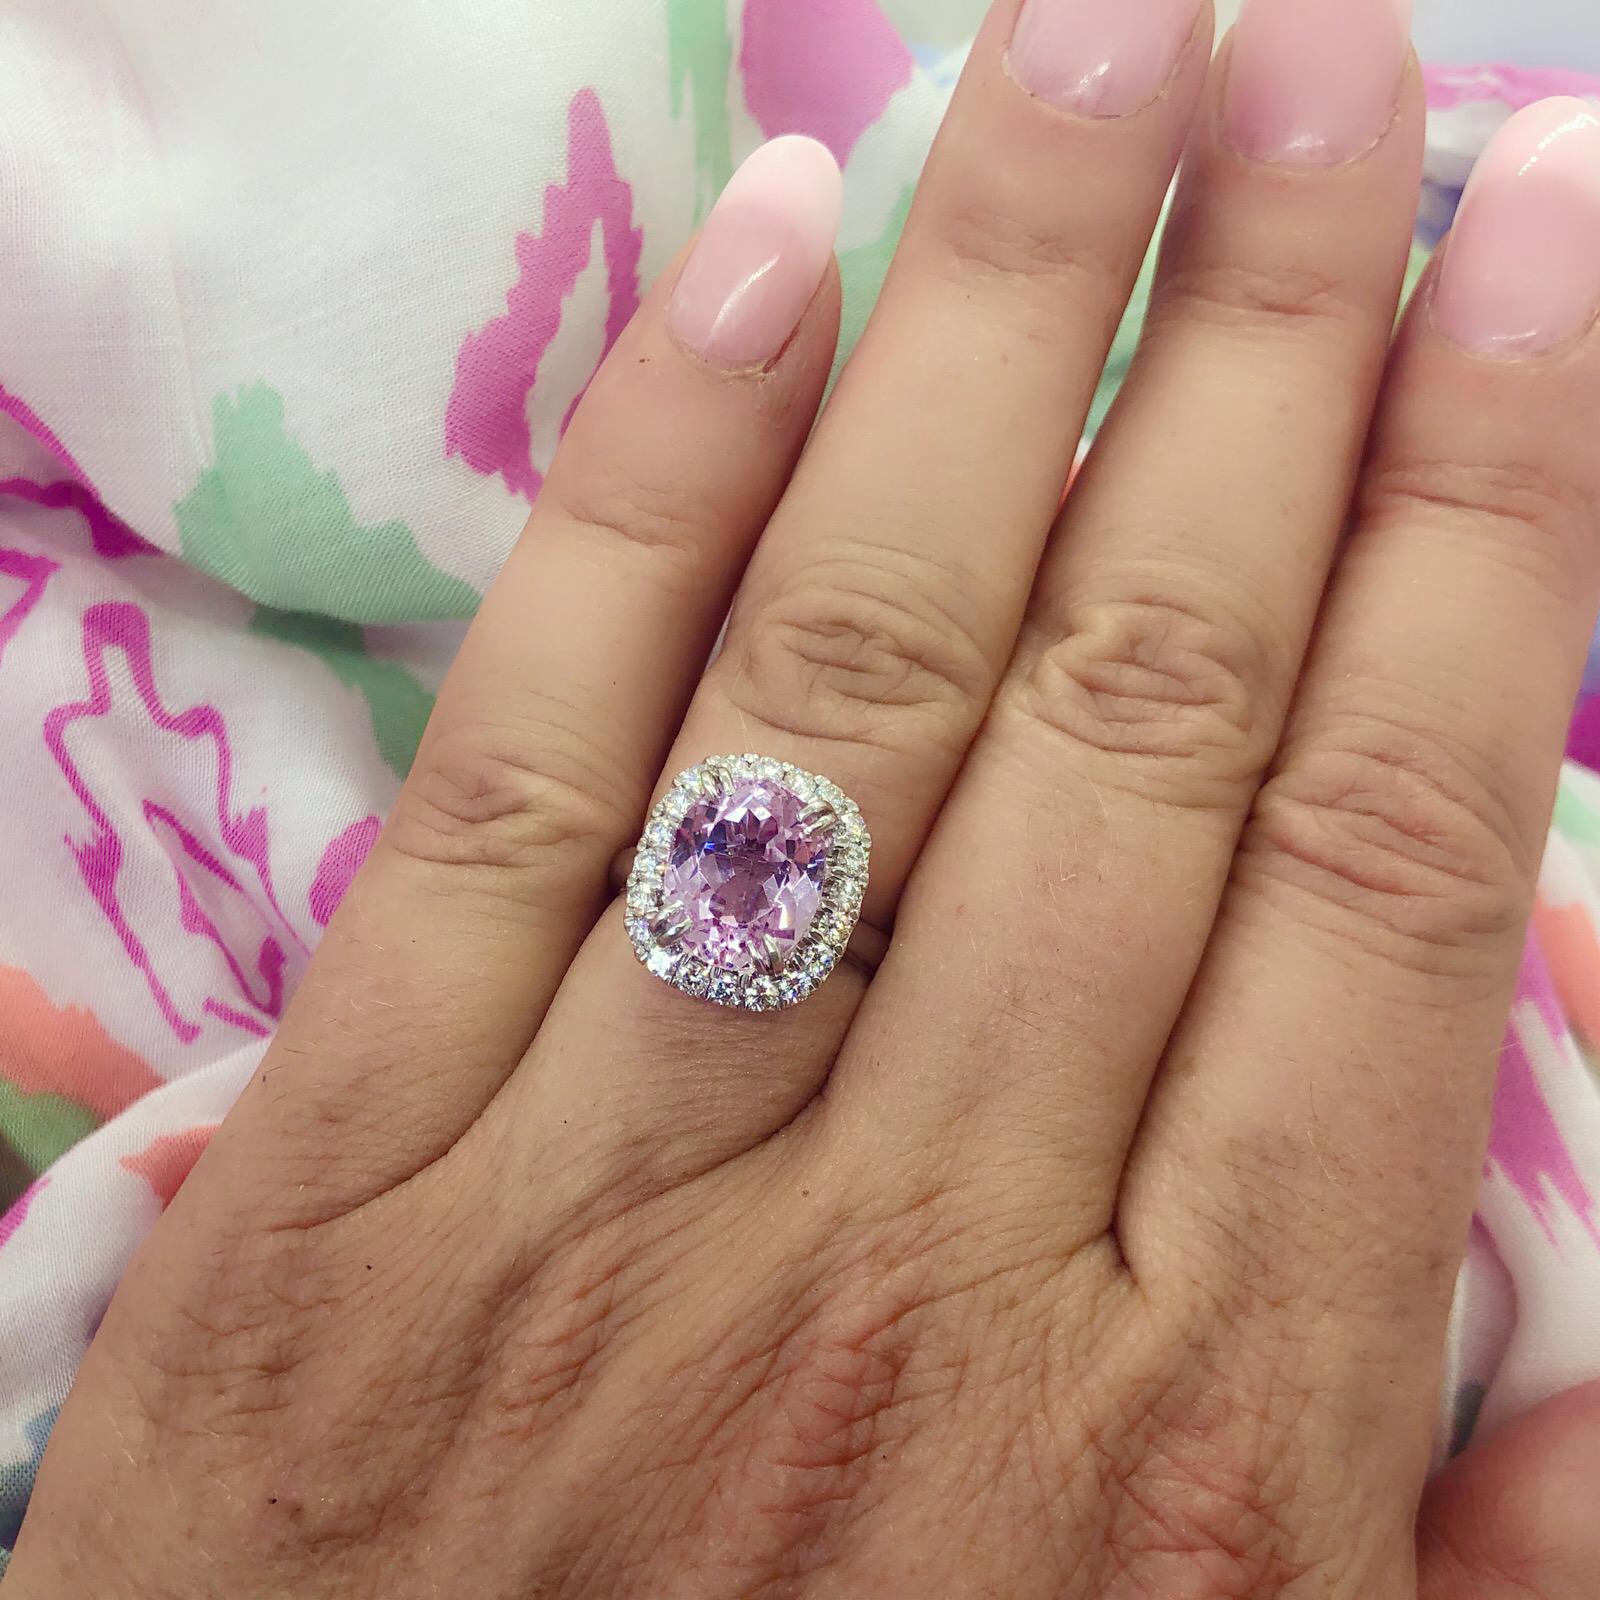 Think pink!! This Princess Diana design platinum ring features a pleasing oval-cut kunzite weighing 5.53 carats, set within a halo of 20 round brilliant-cut diamonds totaling 0.60 carat. The ring weighs 9.5 grams and is currently size 5.75, with